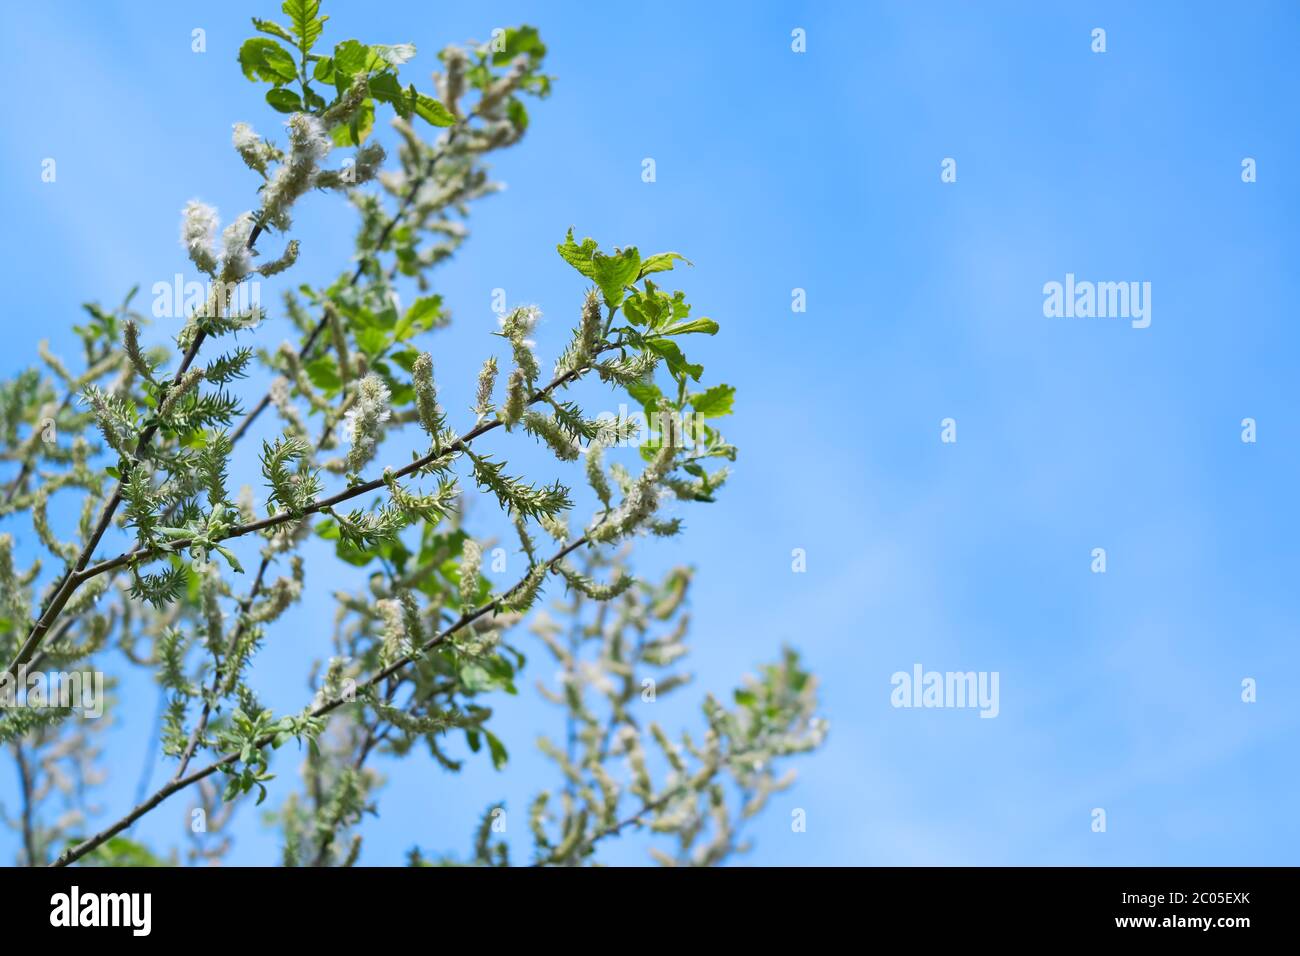 White willow - salix alba - tree with funny white blossoms and fresh green leaves growing at forest edge in middle Germany - Bavaria, Europe. Stock Photo